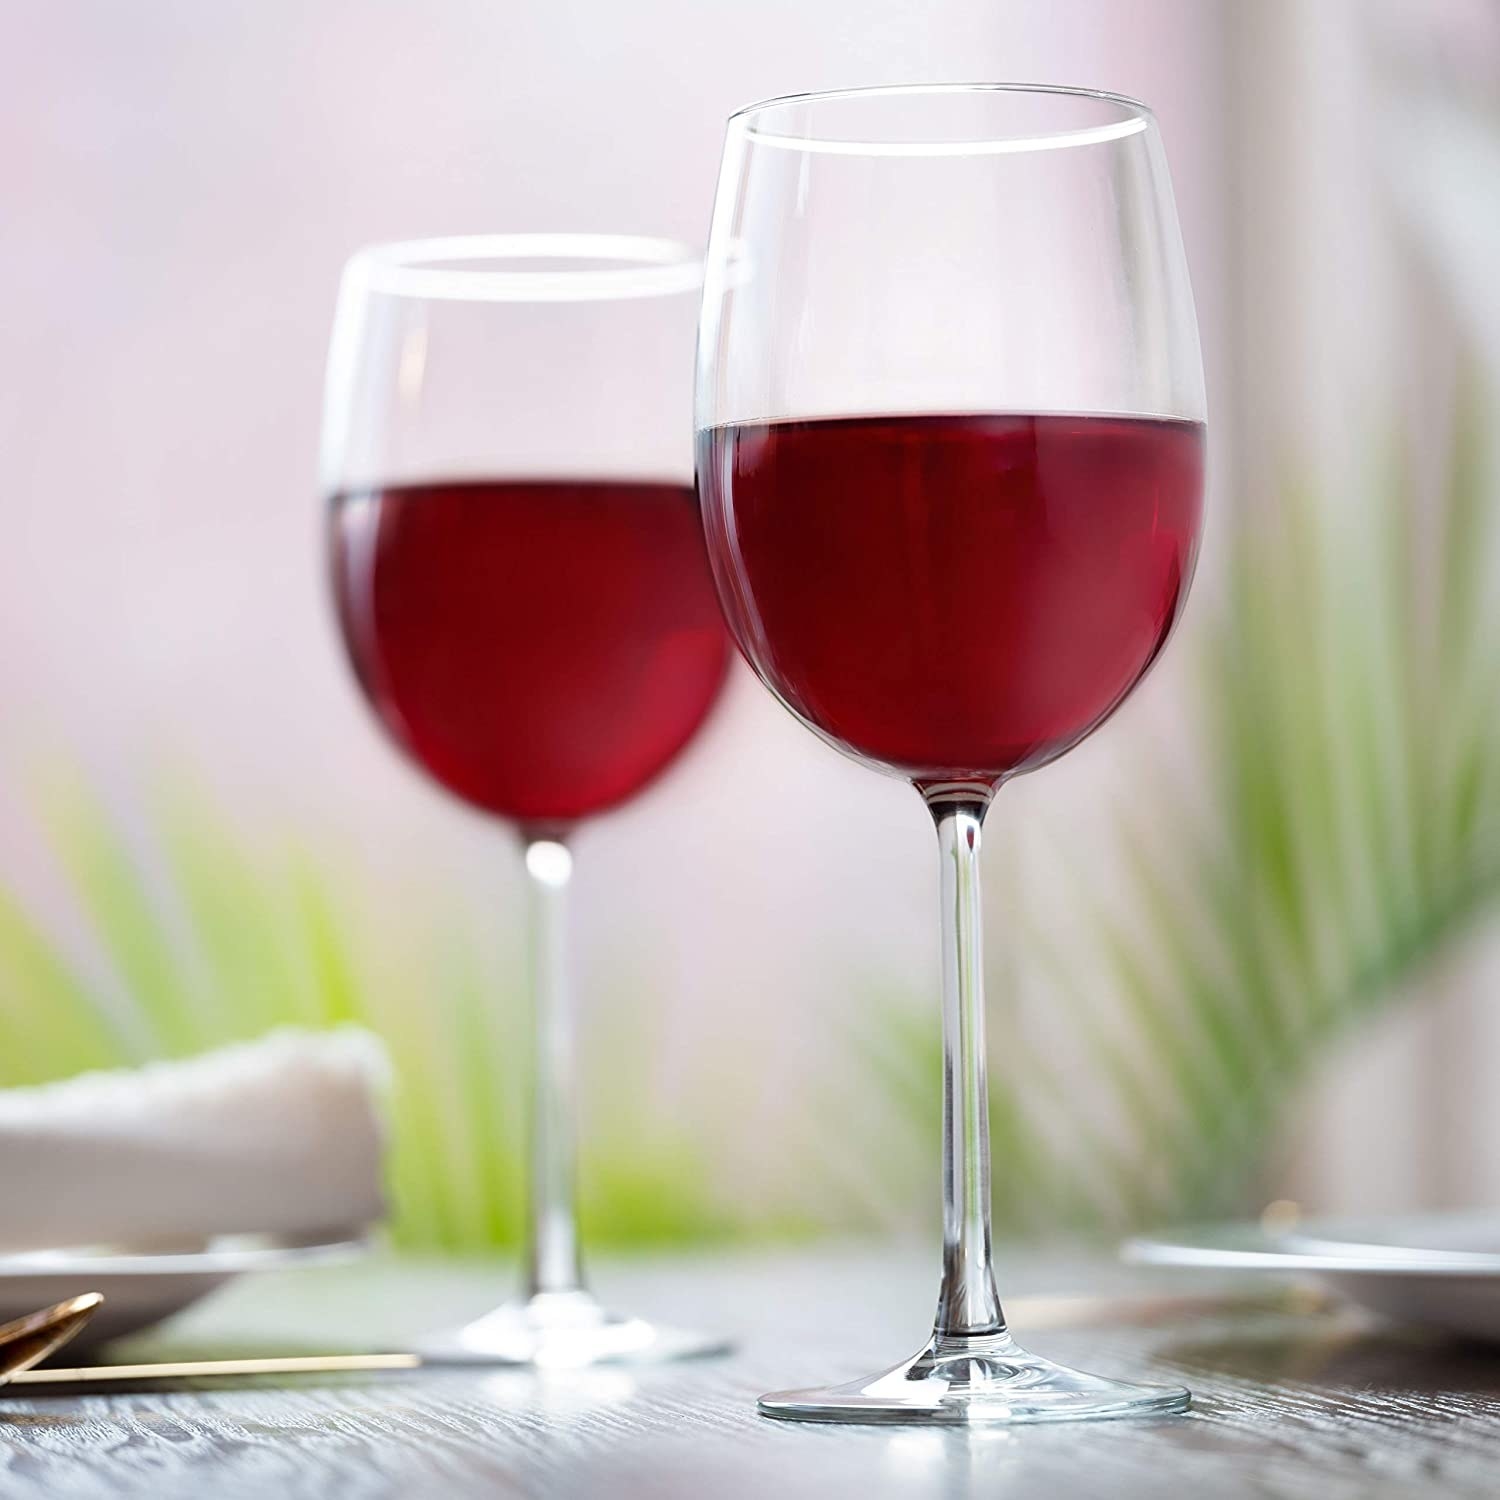 Two wine glasses filled with red wine